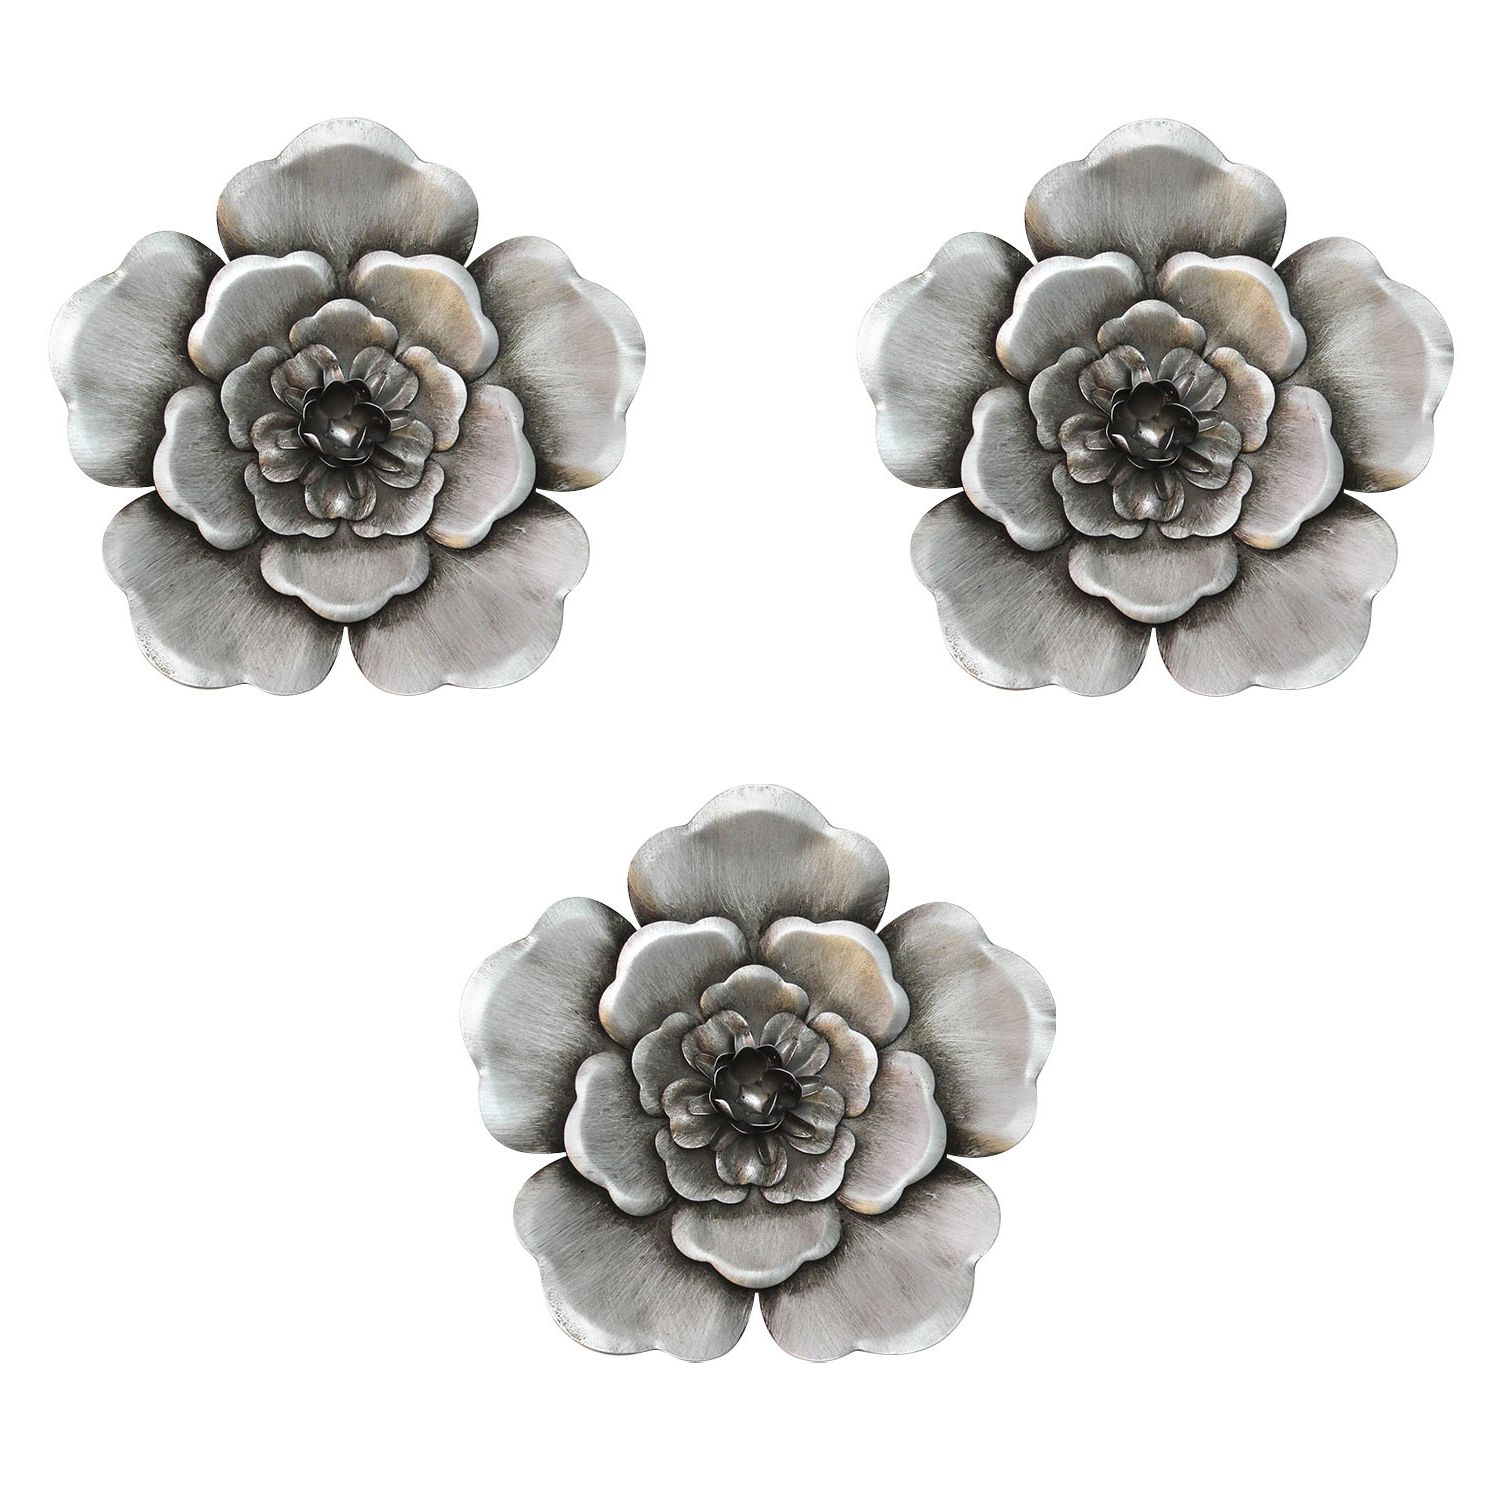 Clickhere2shop: Stratton Home Decor Handcrafted Silver Metal Wall Pertaining To Most Current 2 Piece Multiple Layer Metal Flower Wall Decor Sets (View 10 of 20)